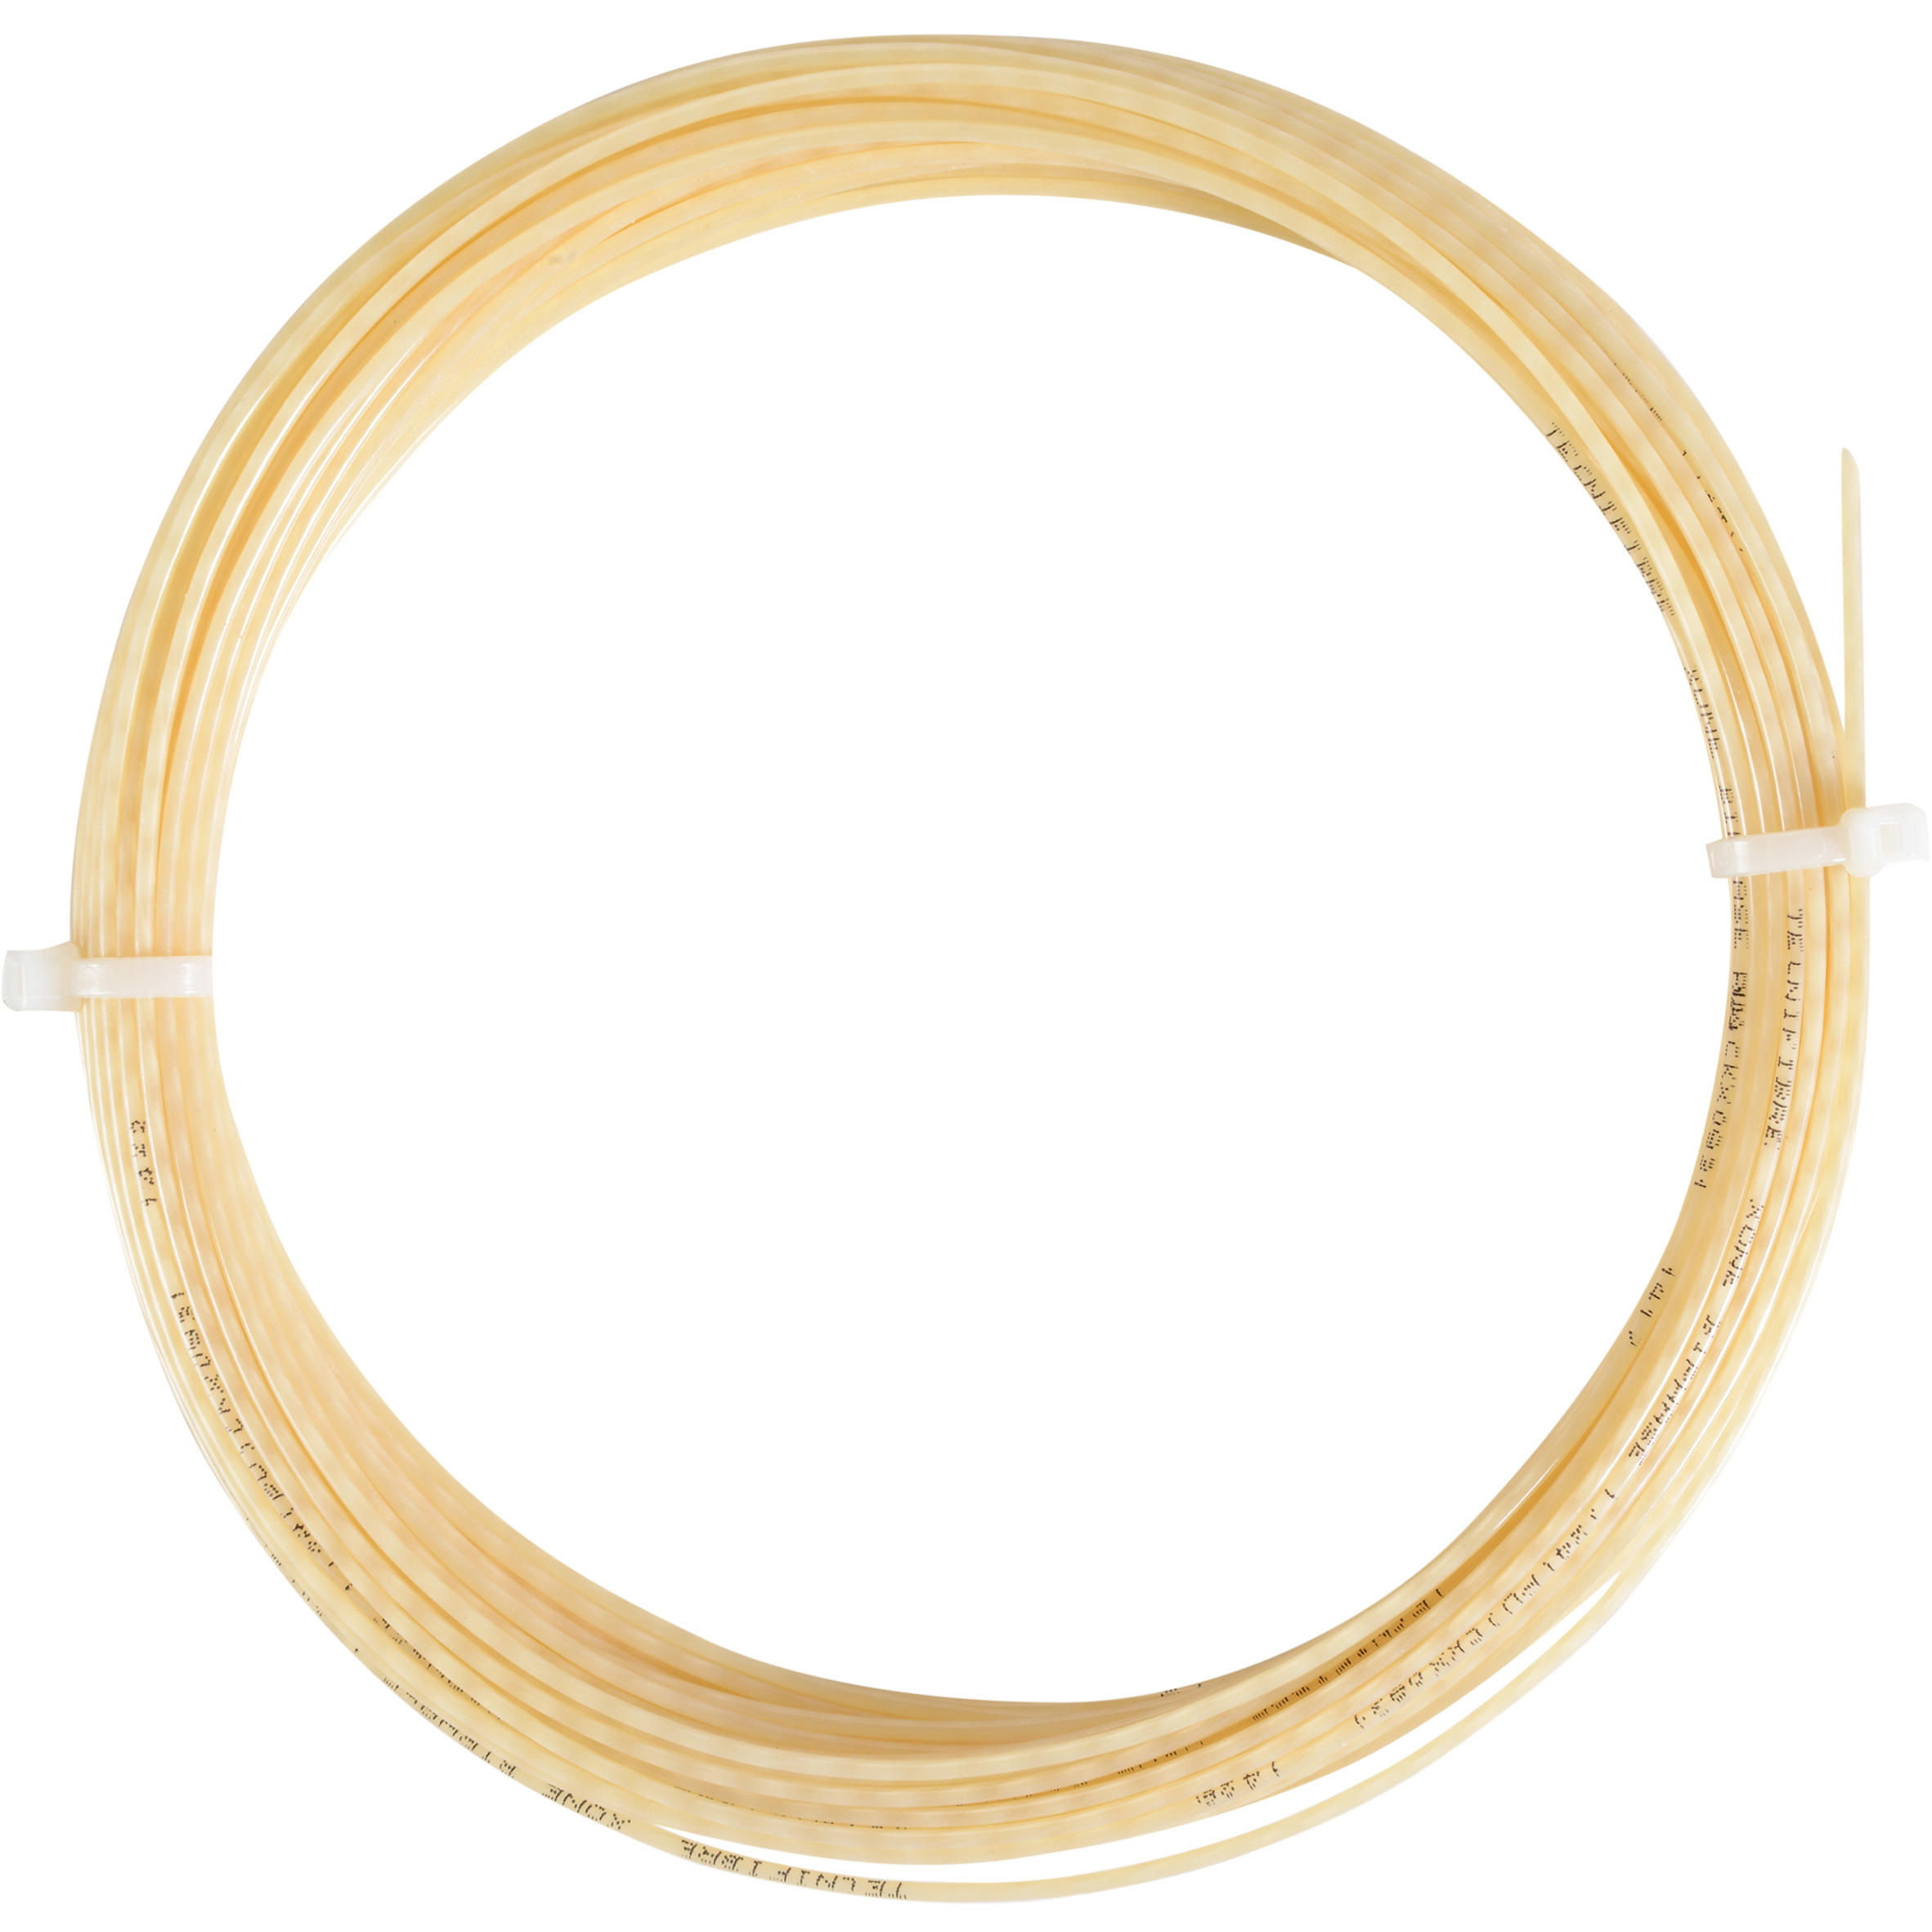 X-One Biphase 1.24 mm Multifilament Tennis String - Natural 2/3